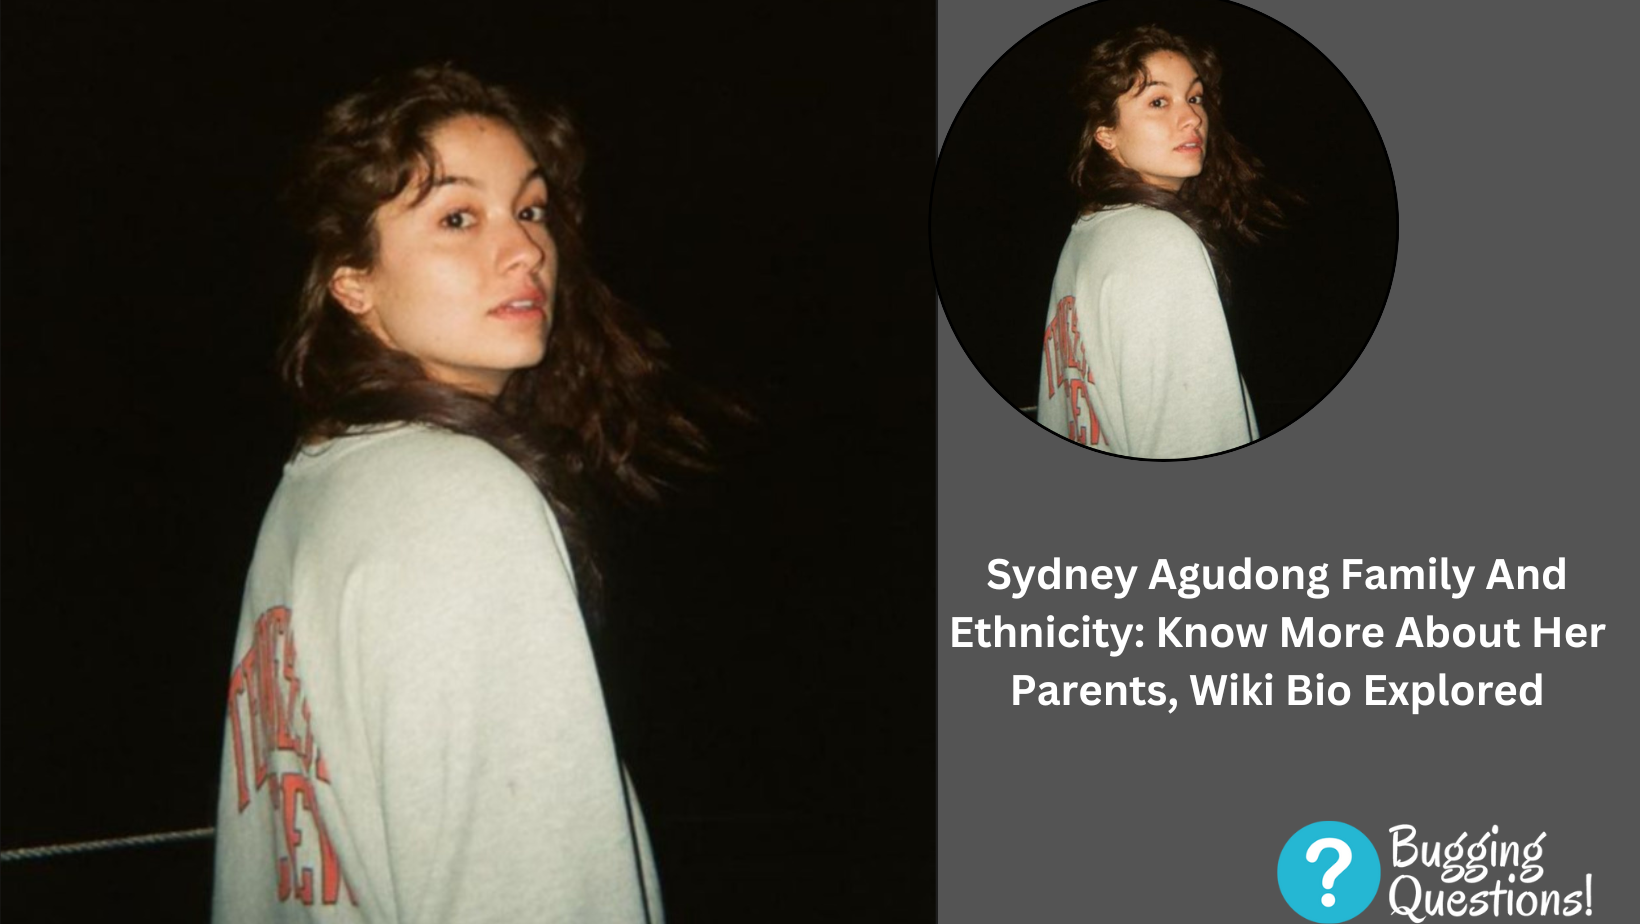 Sydney Agudong Family And Ethnicity